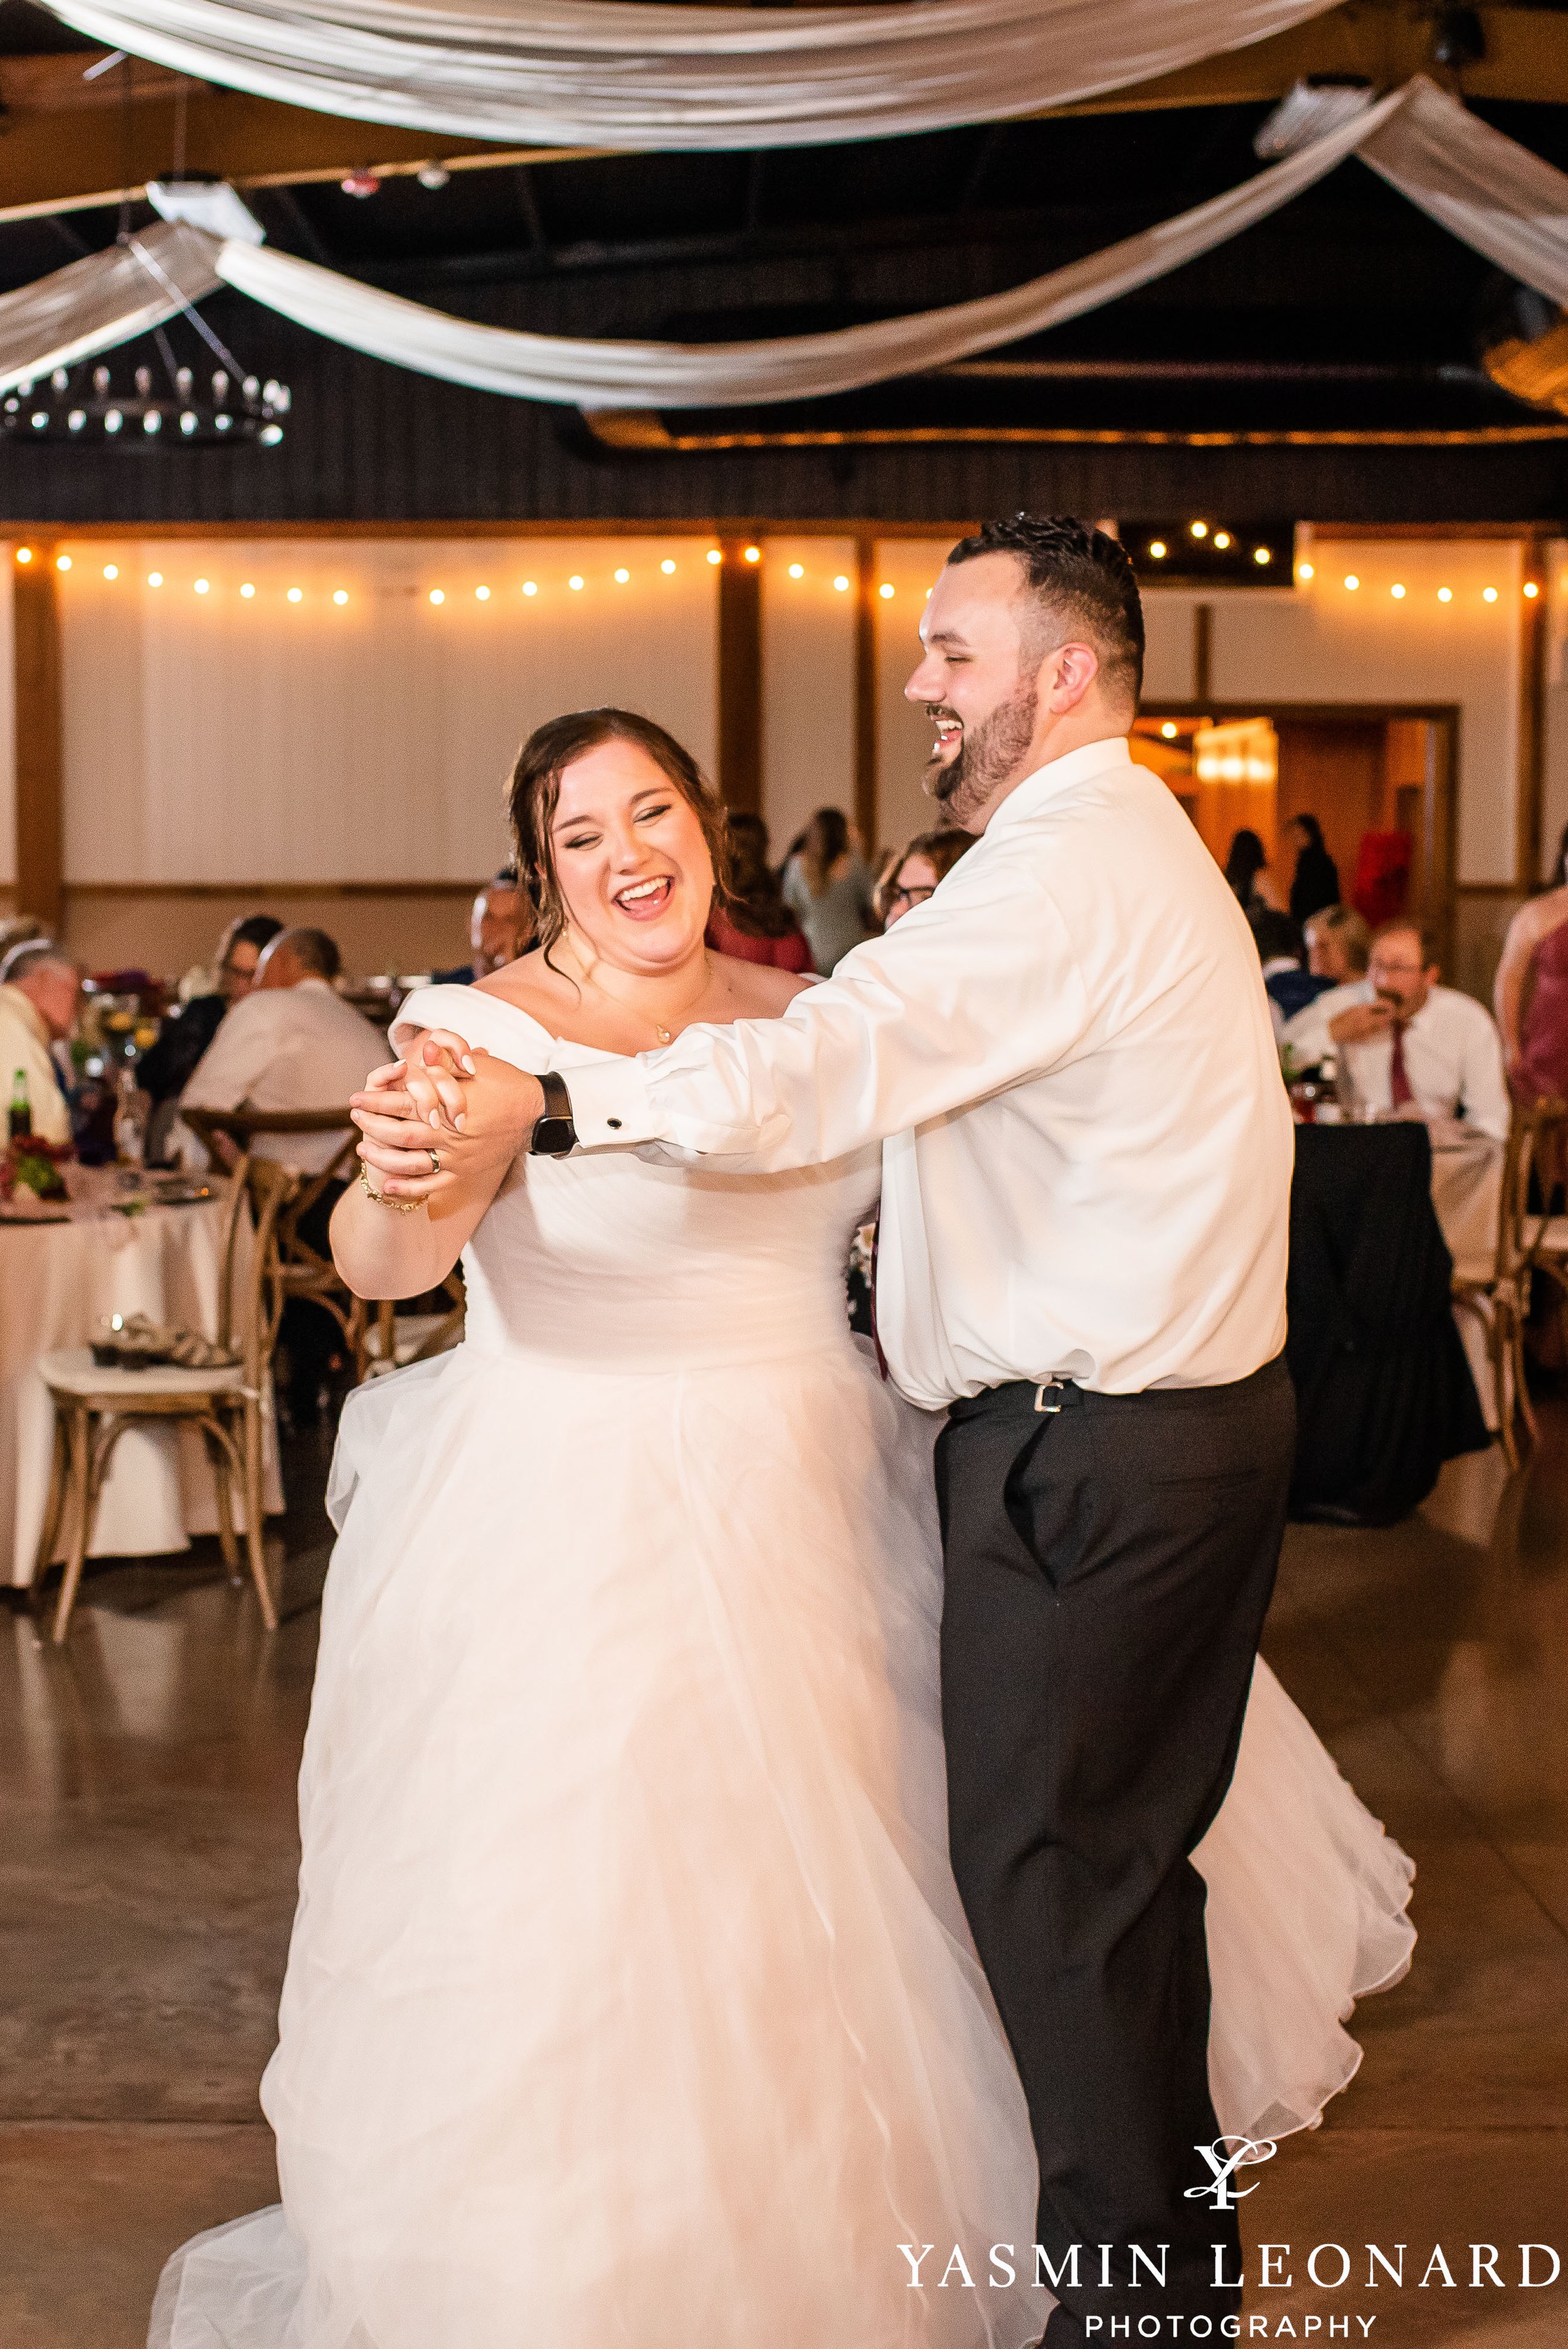 Legacy Stables and Events - Legacy Stables Wedding - Morgan and Logan - NC Weddings - Marry Me NC - Triad Weddings - Best Wedding Photographer Near Me - Best Photographer in High Point - Yasmin Leonard Photography-38.jpg